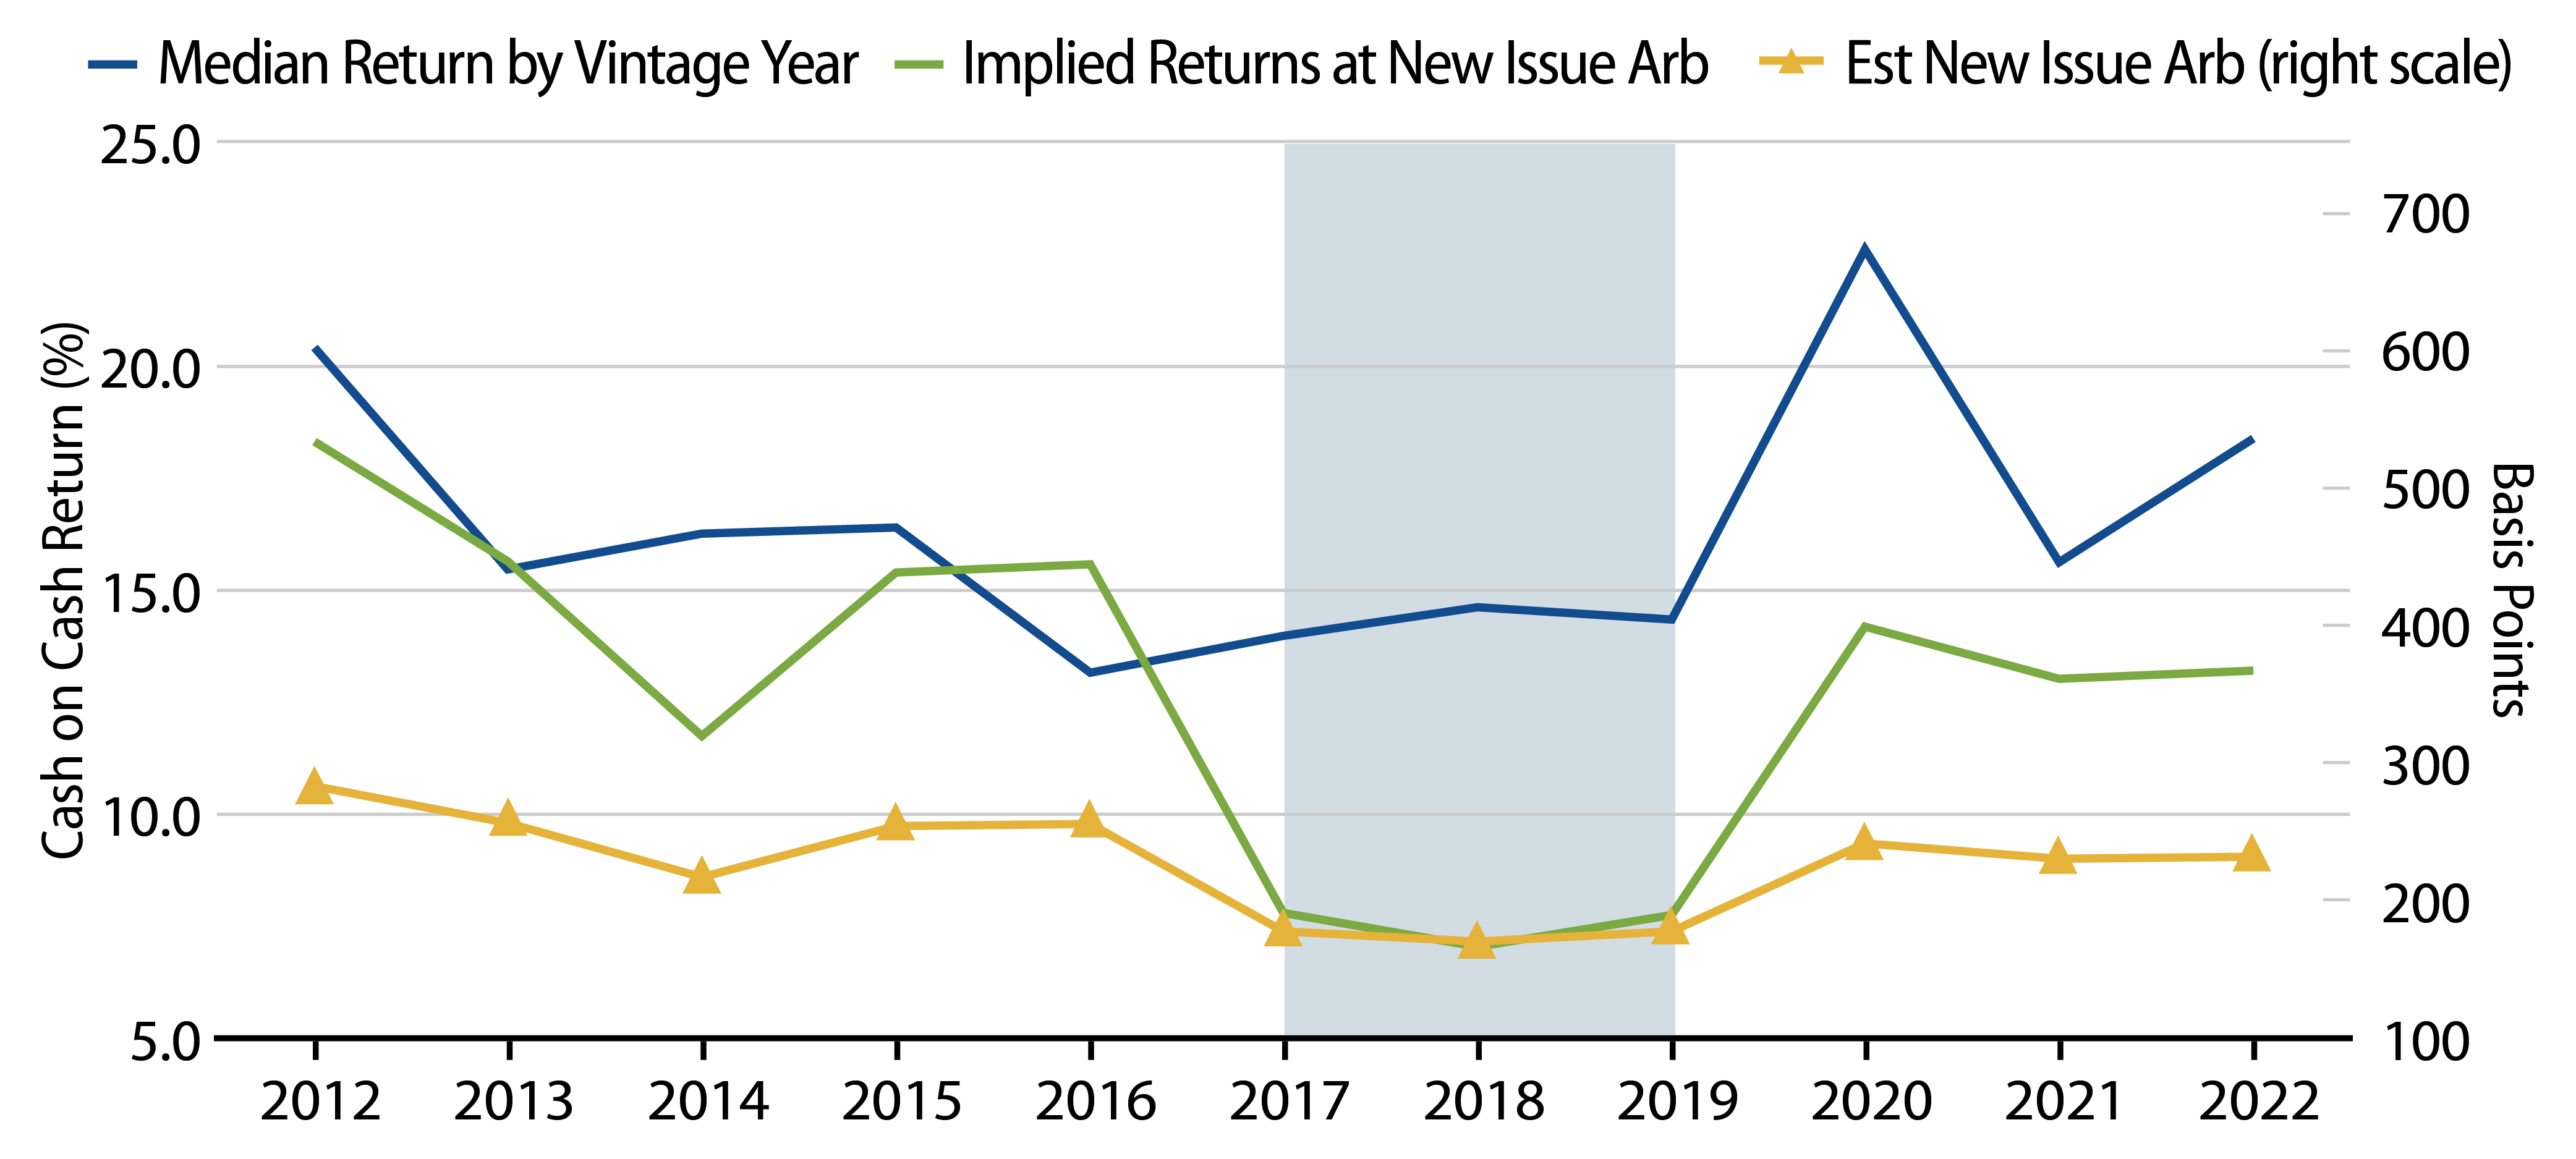 Explore Cash Flow Returns Are Typically Higher Than Implied by New Issue Arb